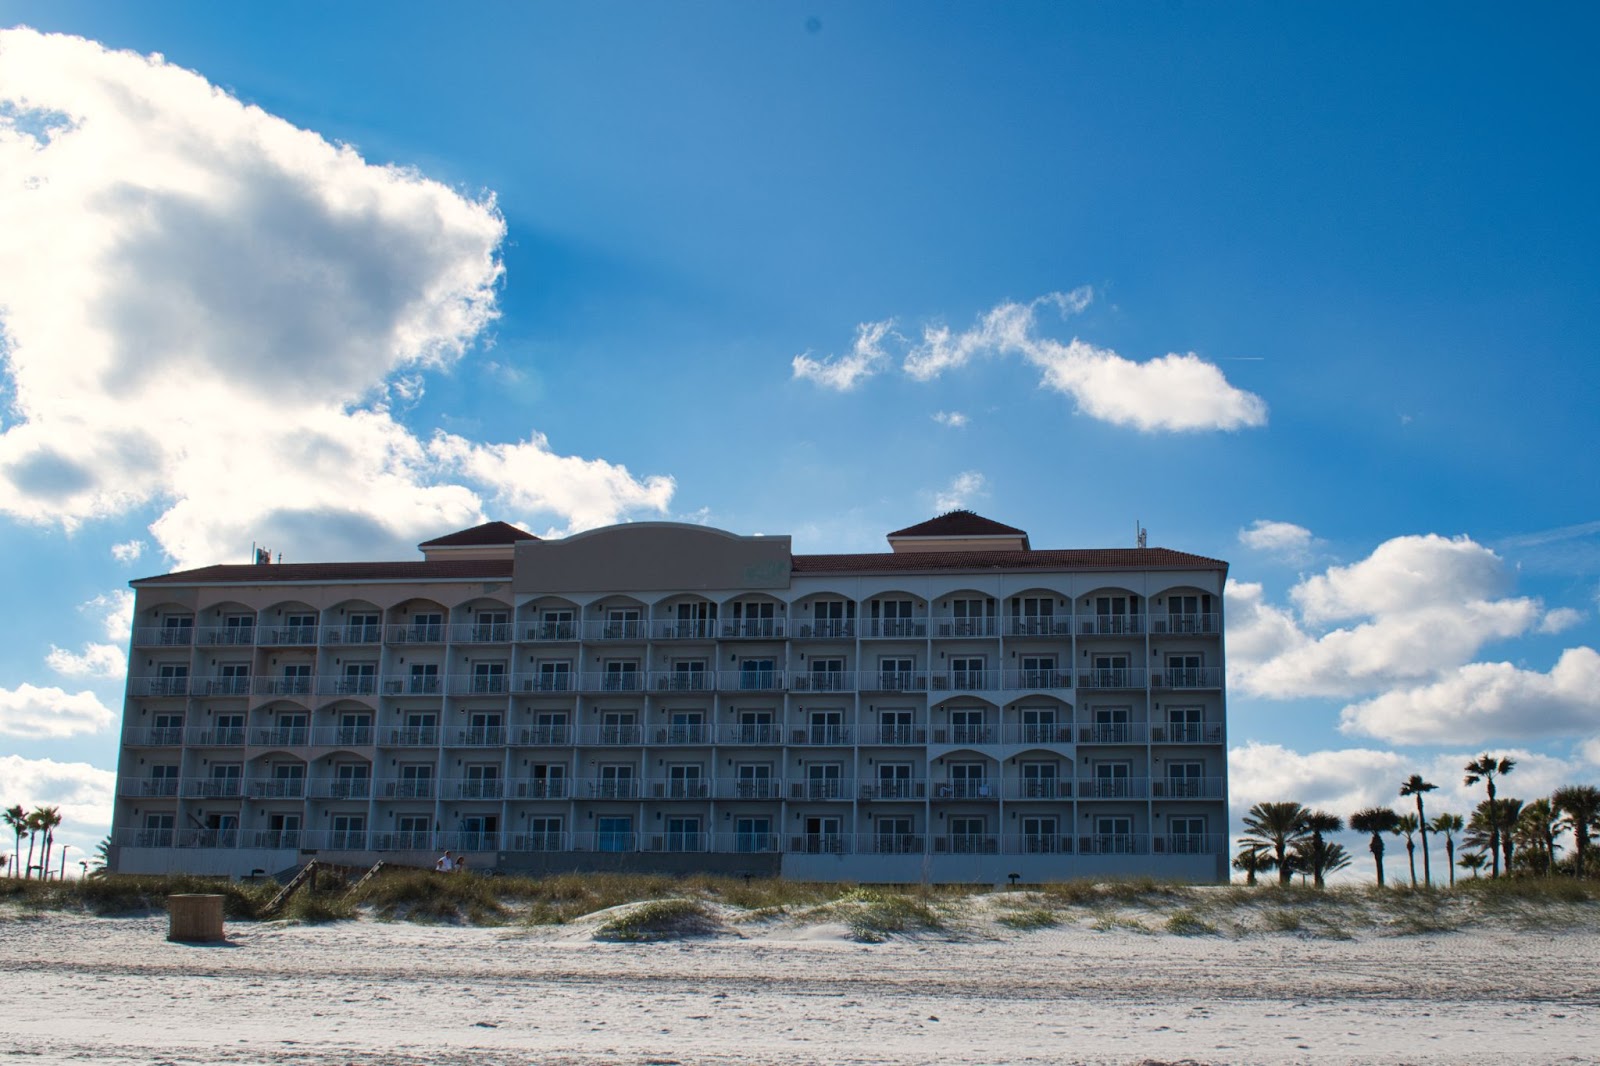 where to stay in Jacksonville, resorts in jacksonville fl, downtown jacksonville hotels, jacksonville hotels, jacksonville beach hotels, best hotels in jacksonville fl, courtyard marriott jacksonville beach, oceanfront hotels jacksonville fl, jax rentals, airbnb in jacksonville fl